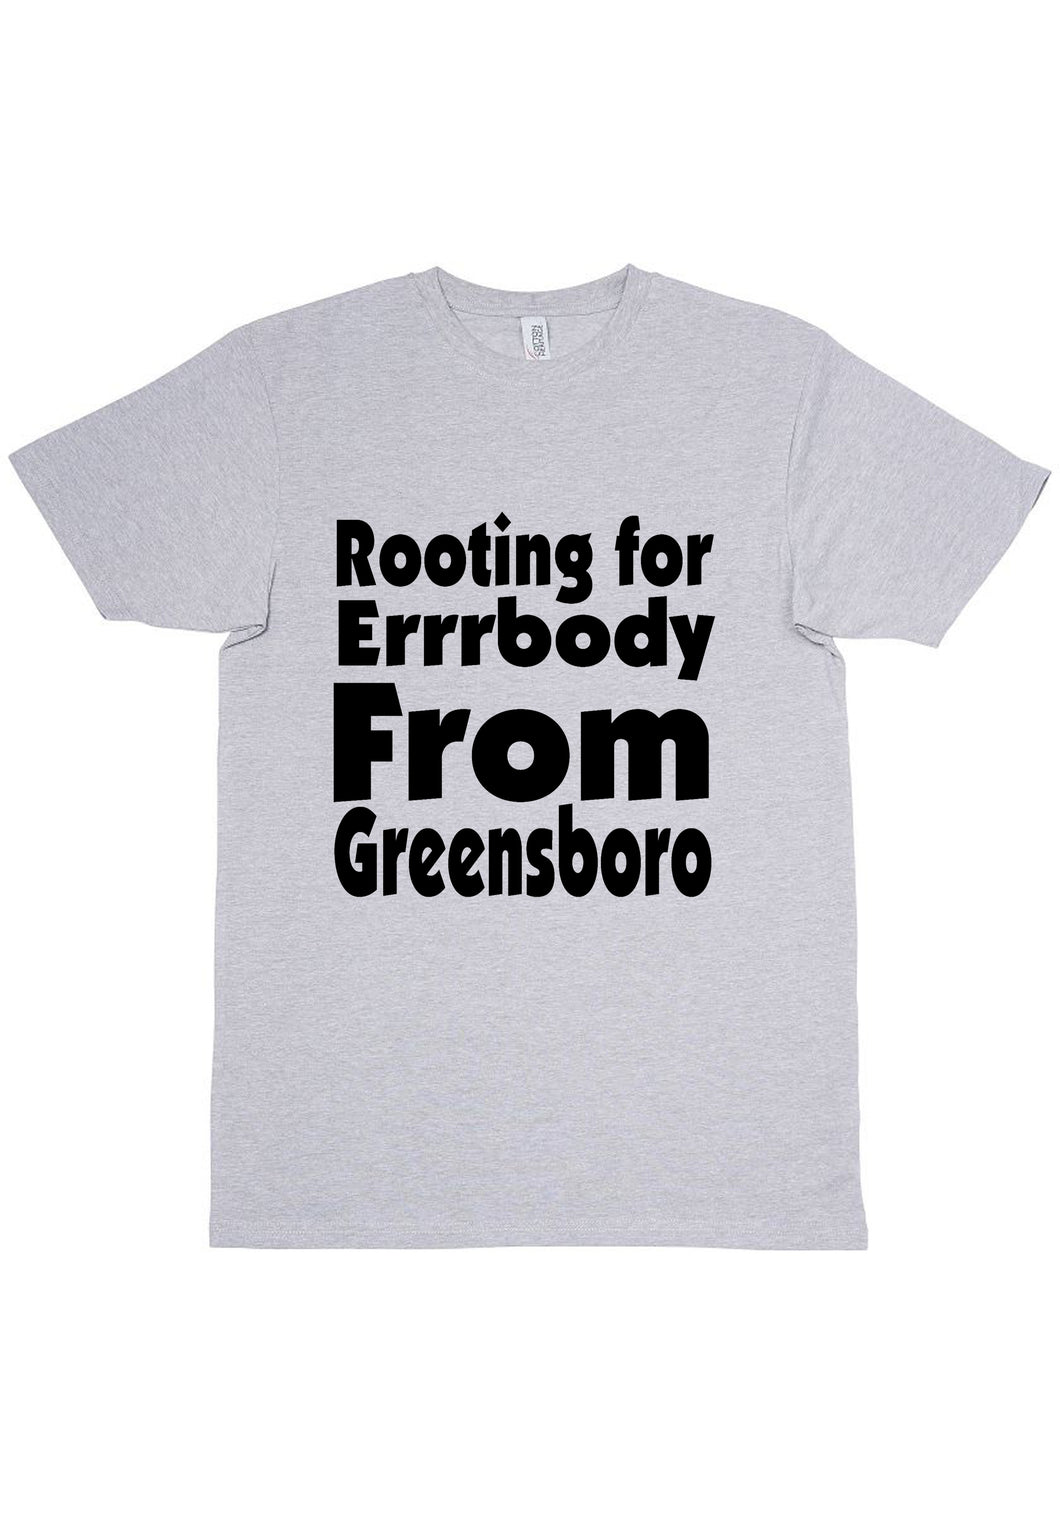 Rooting For Greensboro T-Shirt